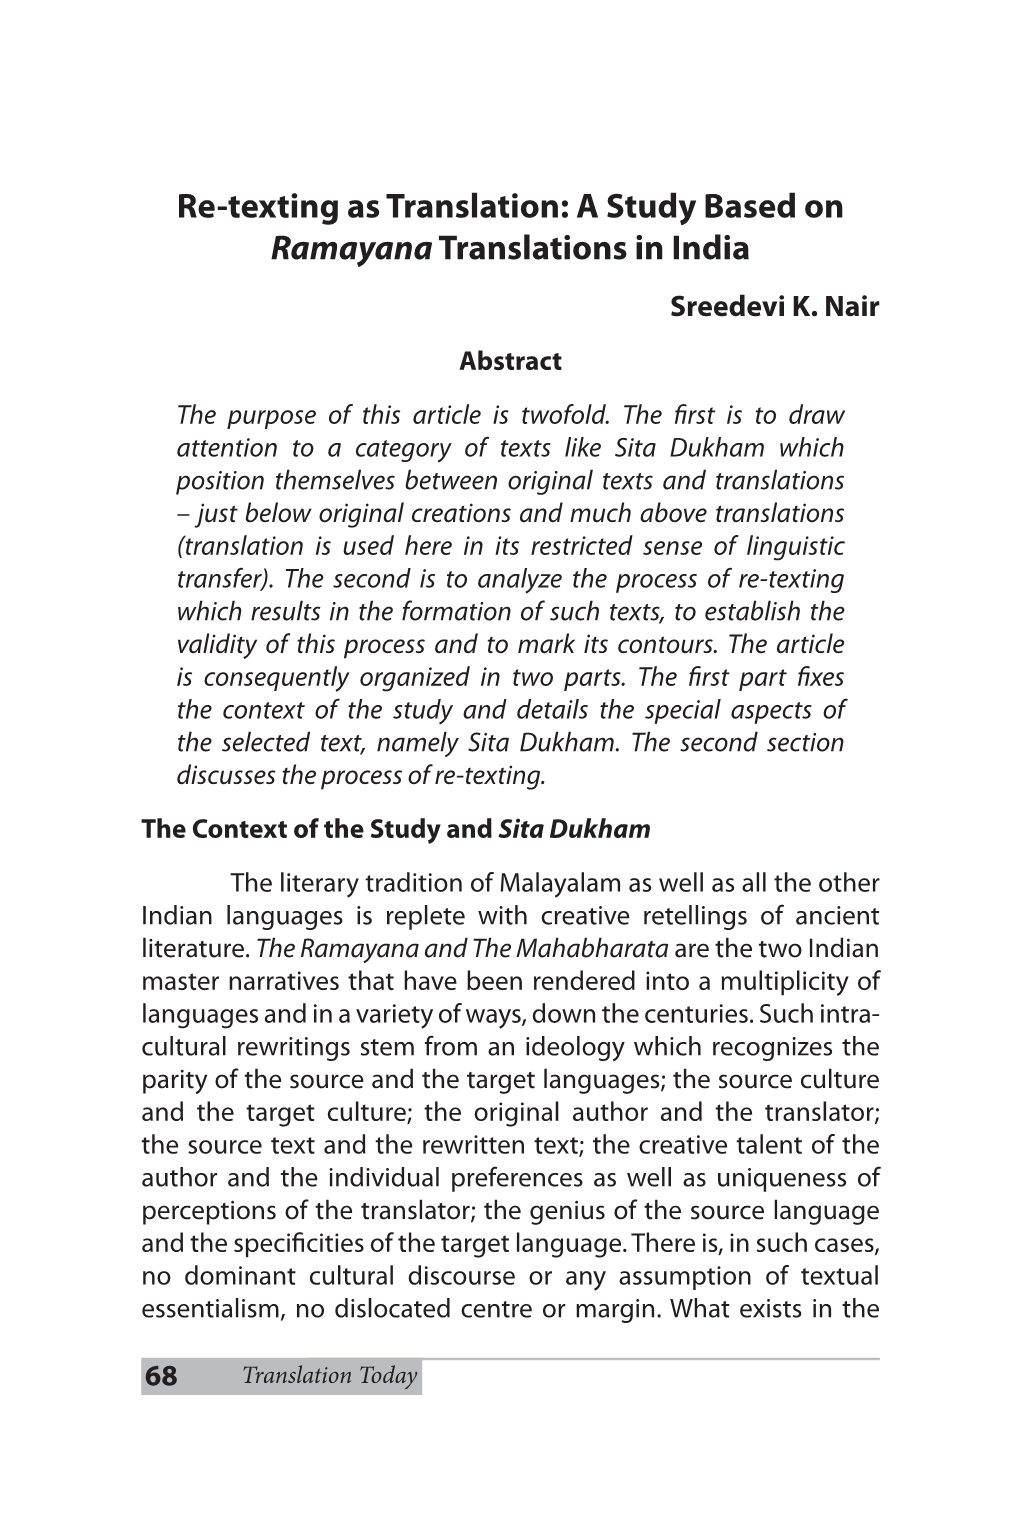 Re-Texting As Translation: a Study Based on Ramayanatranslations In